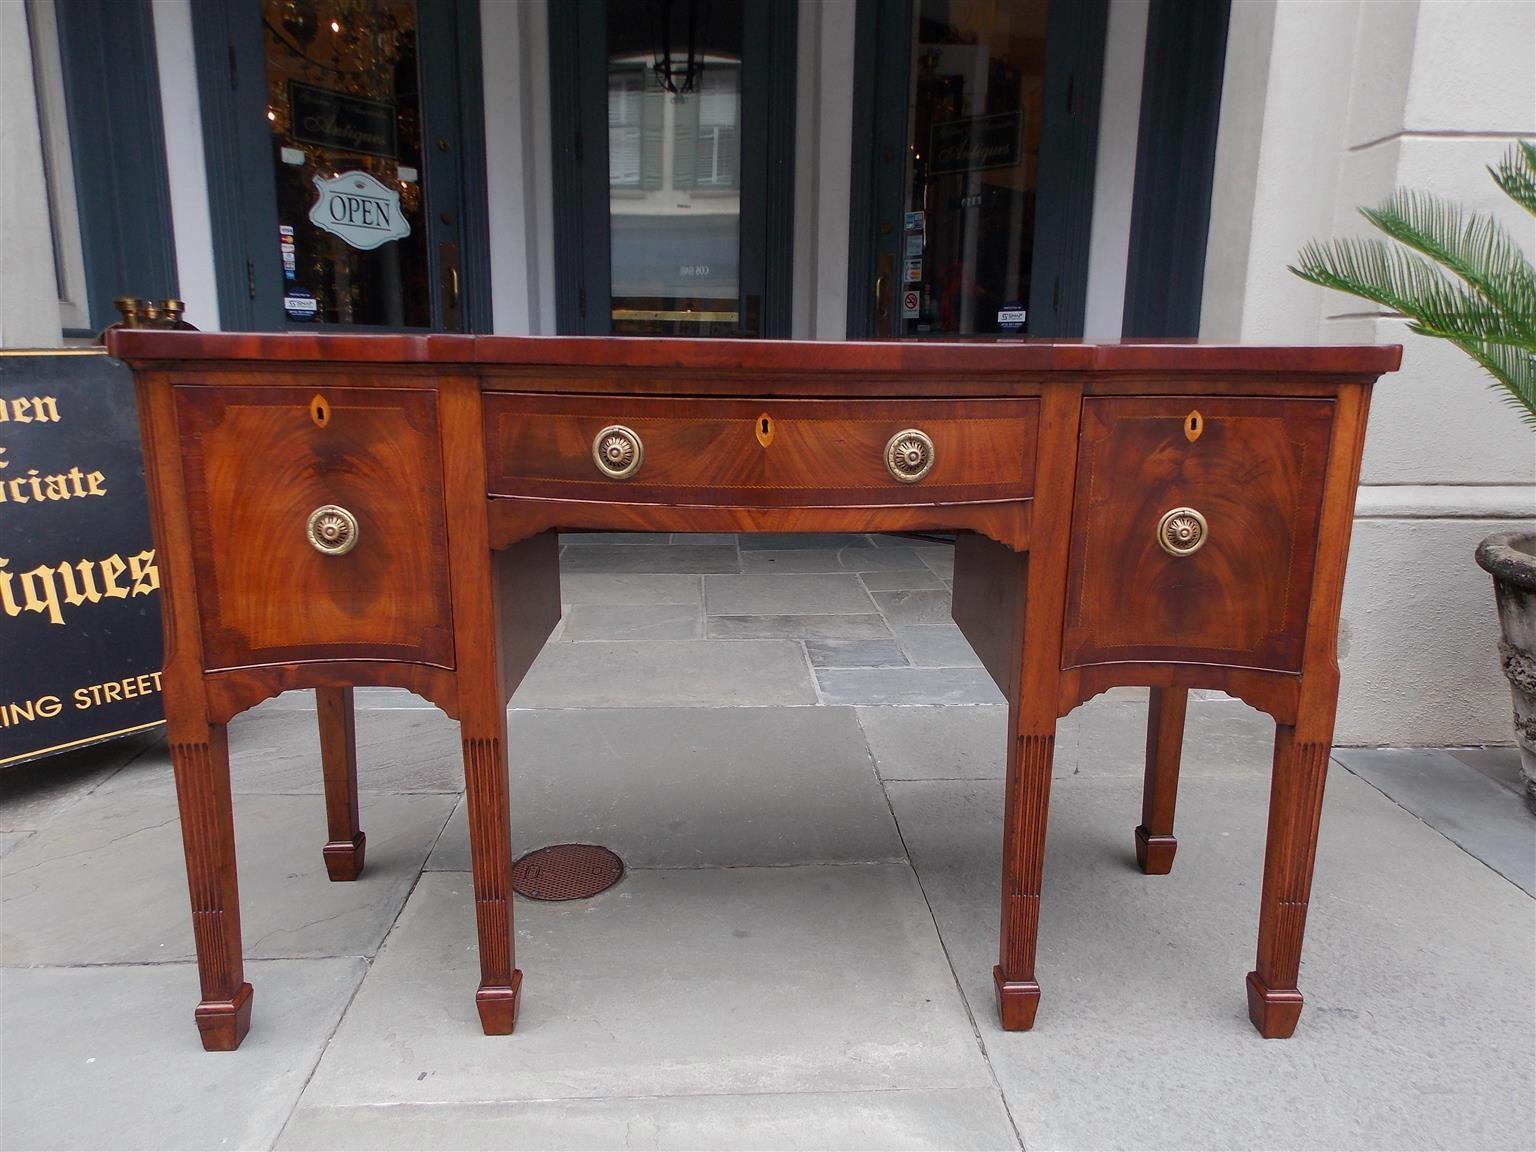 English Hepplewhite mahogany serpentine sideboard with a cross banded top, satinwood and ebony inlaid checkering, centered bowed felt line drawer for silver, flanking cross banded inlaid cellarette drawers, period brasses with inlaid oval diamond